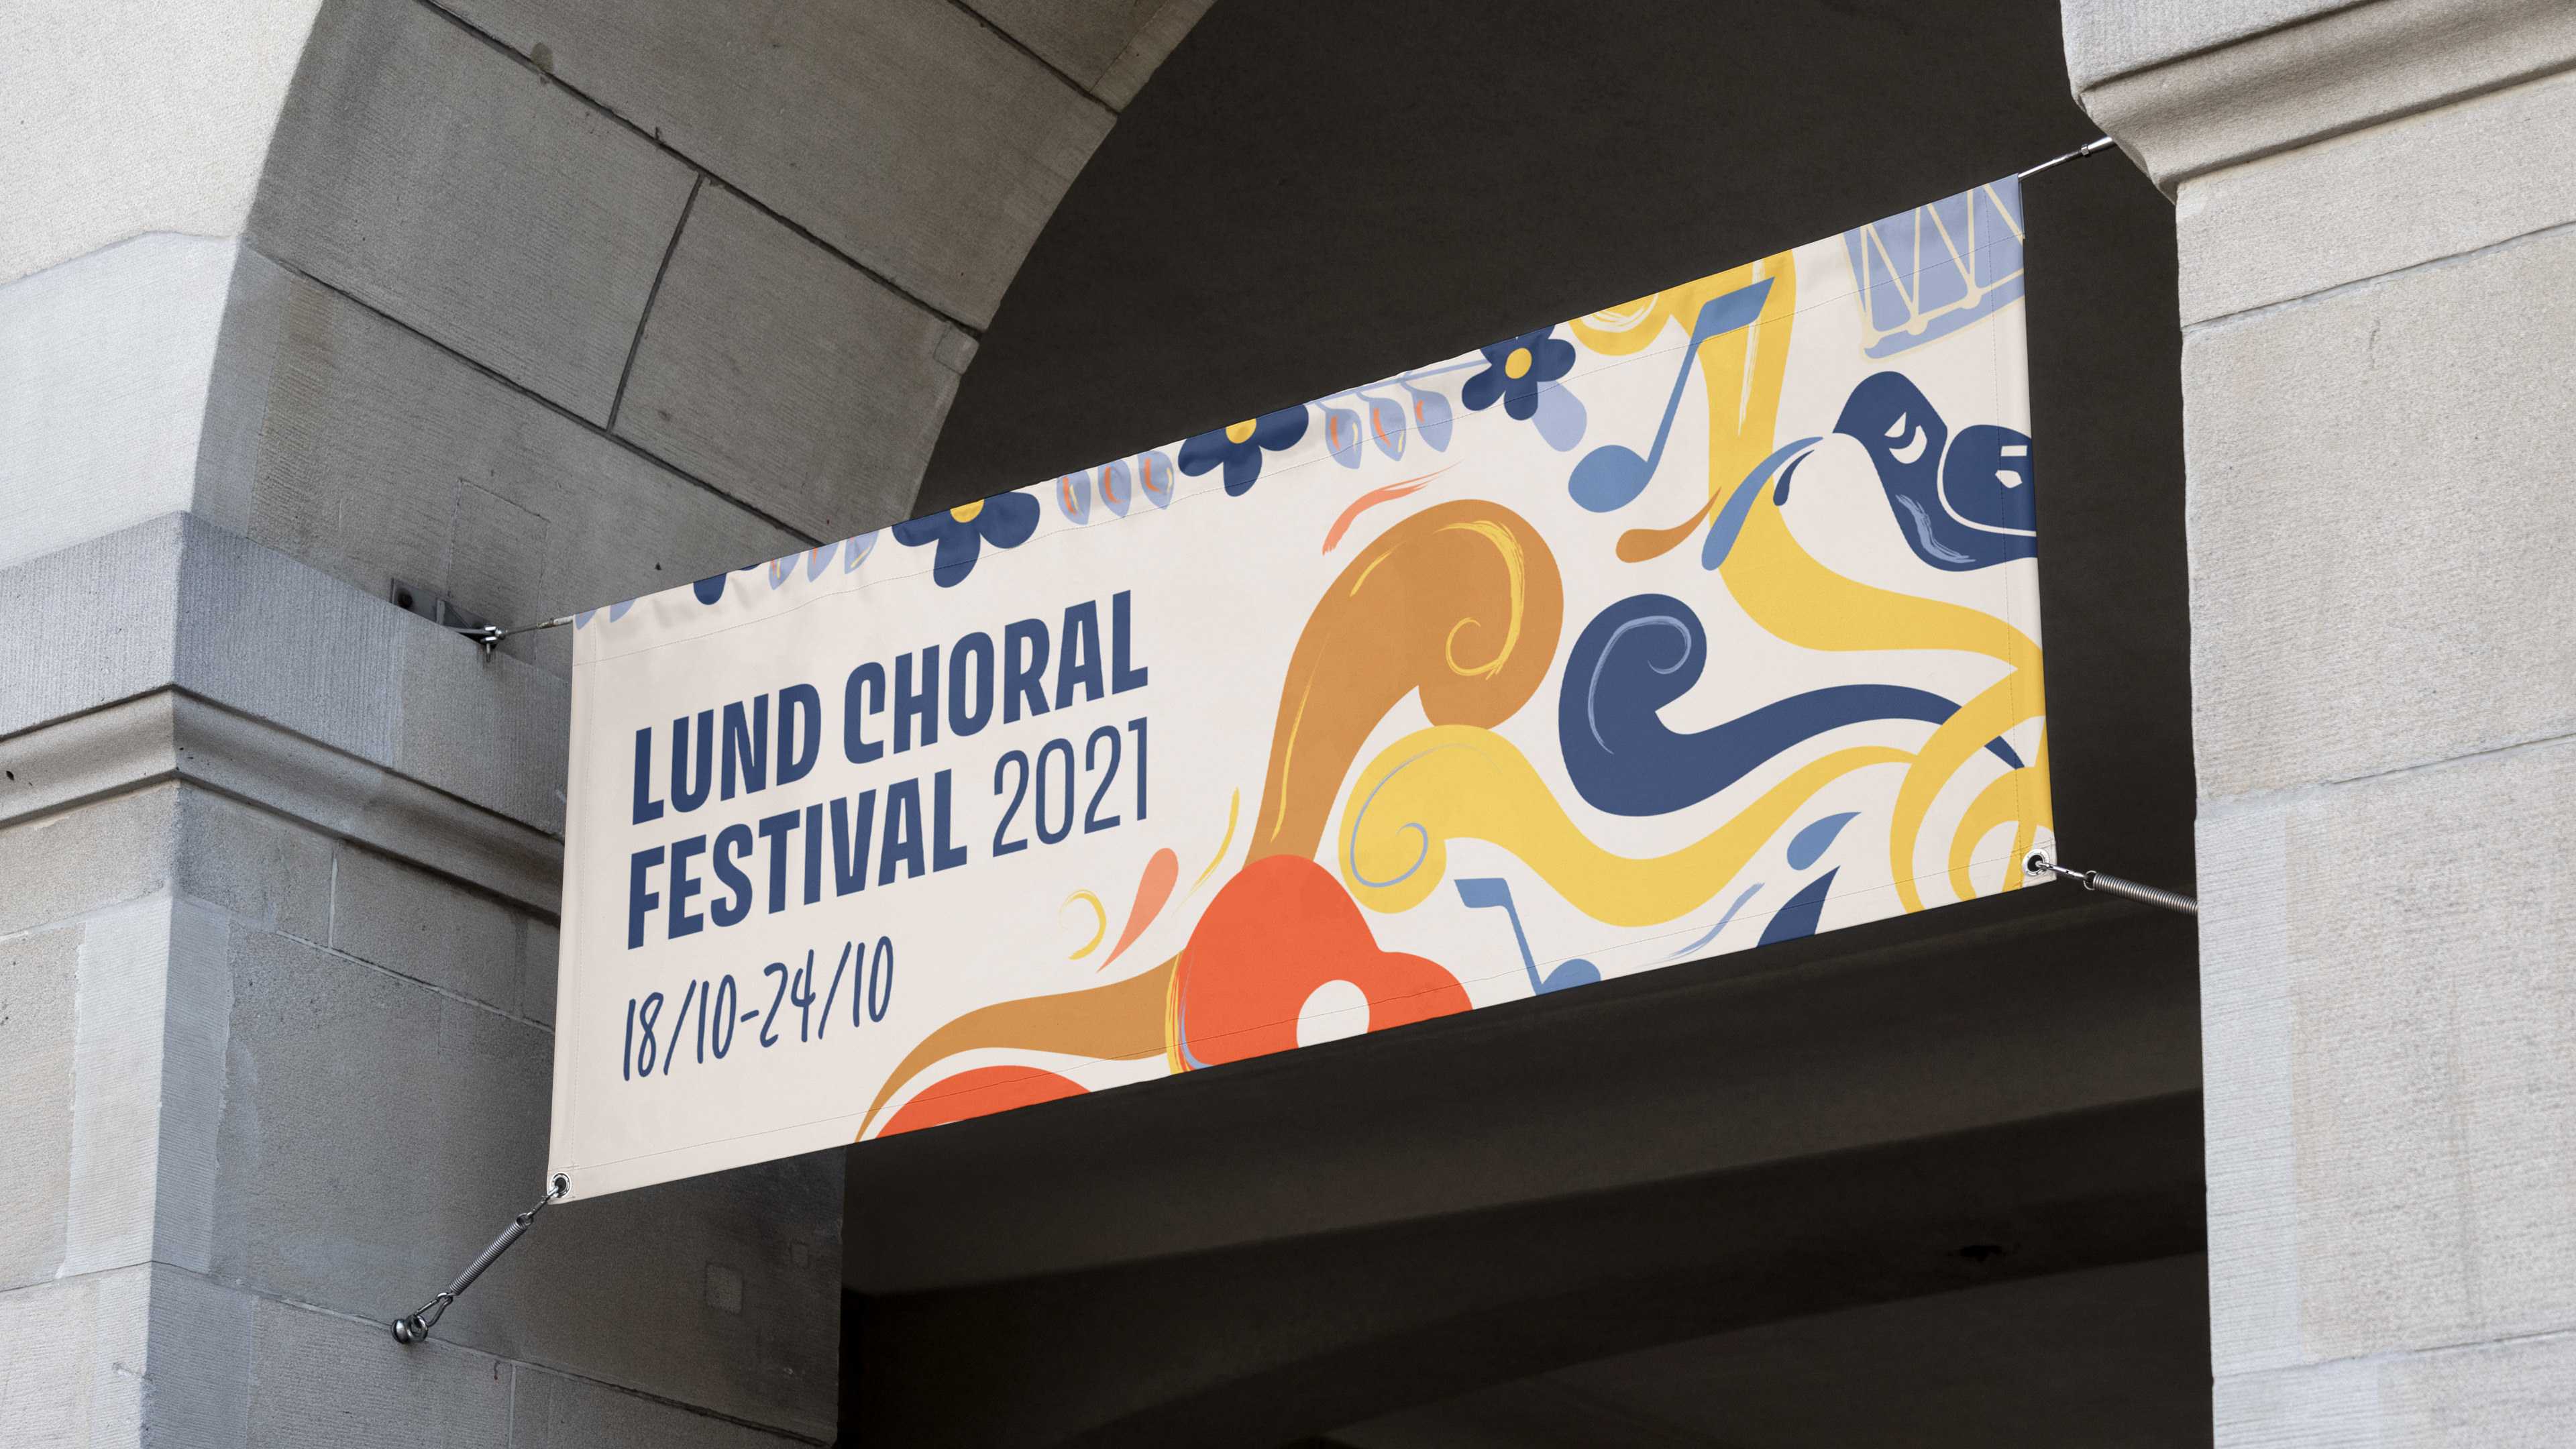 Banner for Lund choral festival designed by Studio Poi